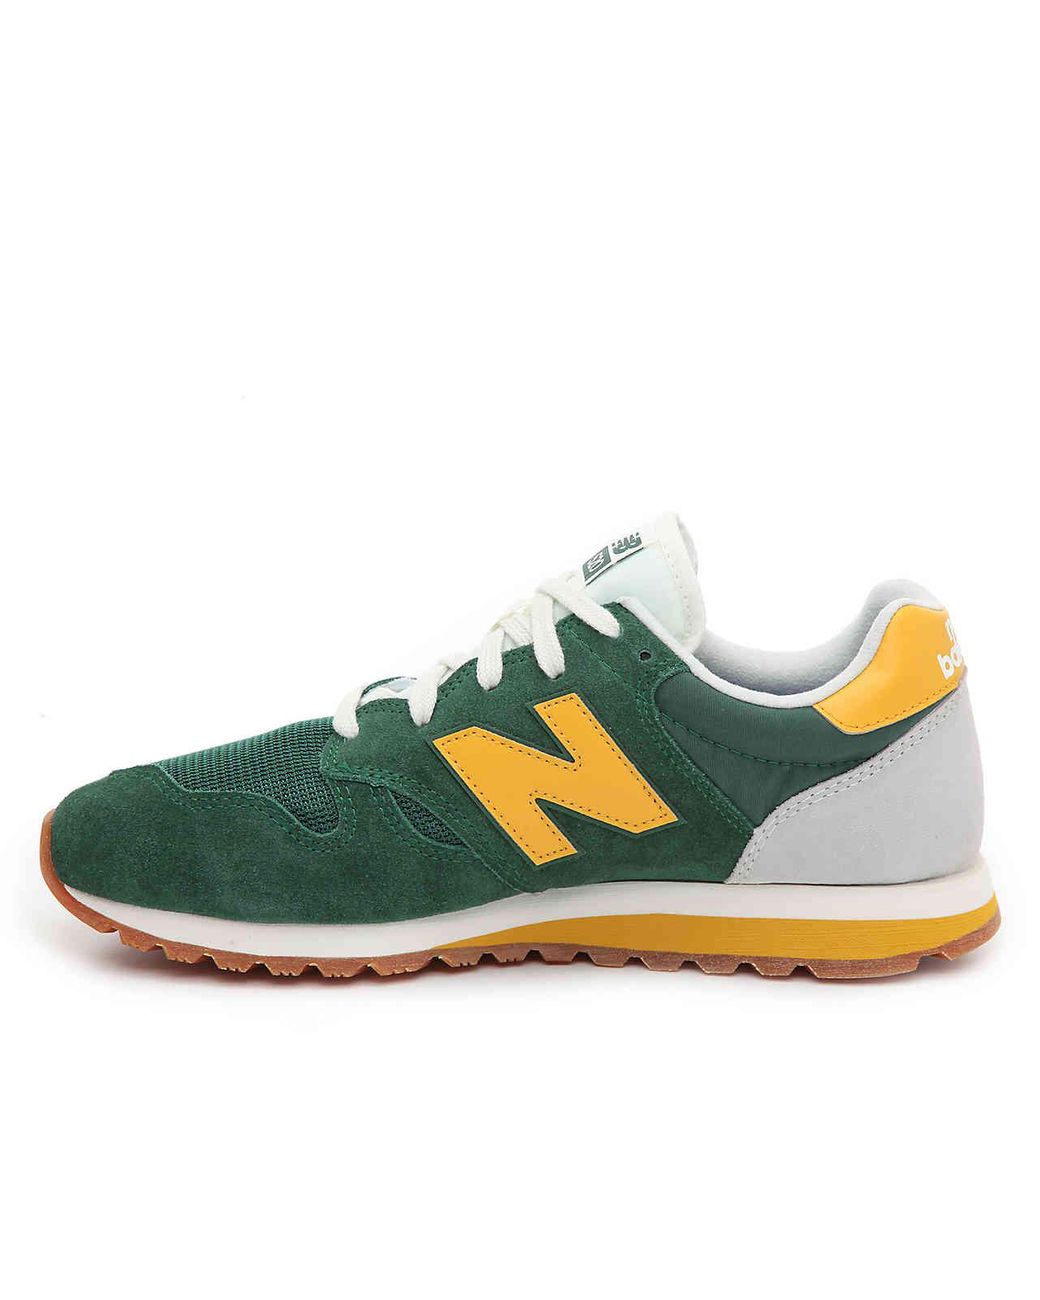 New Balance Suede 520 Sneaker in Green/Mustard Yellow (Green) for Men | Lyst